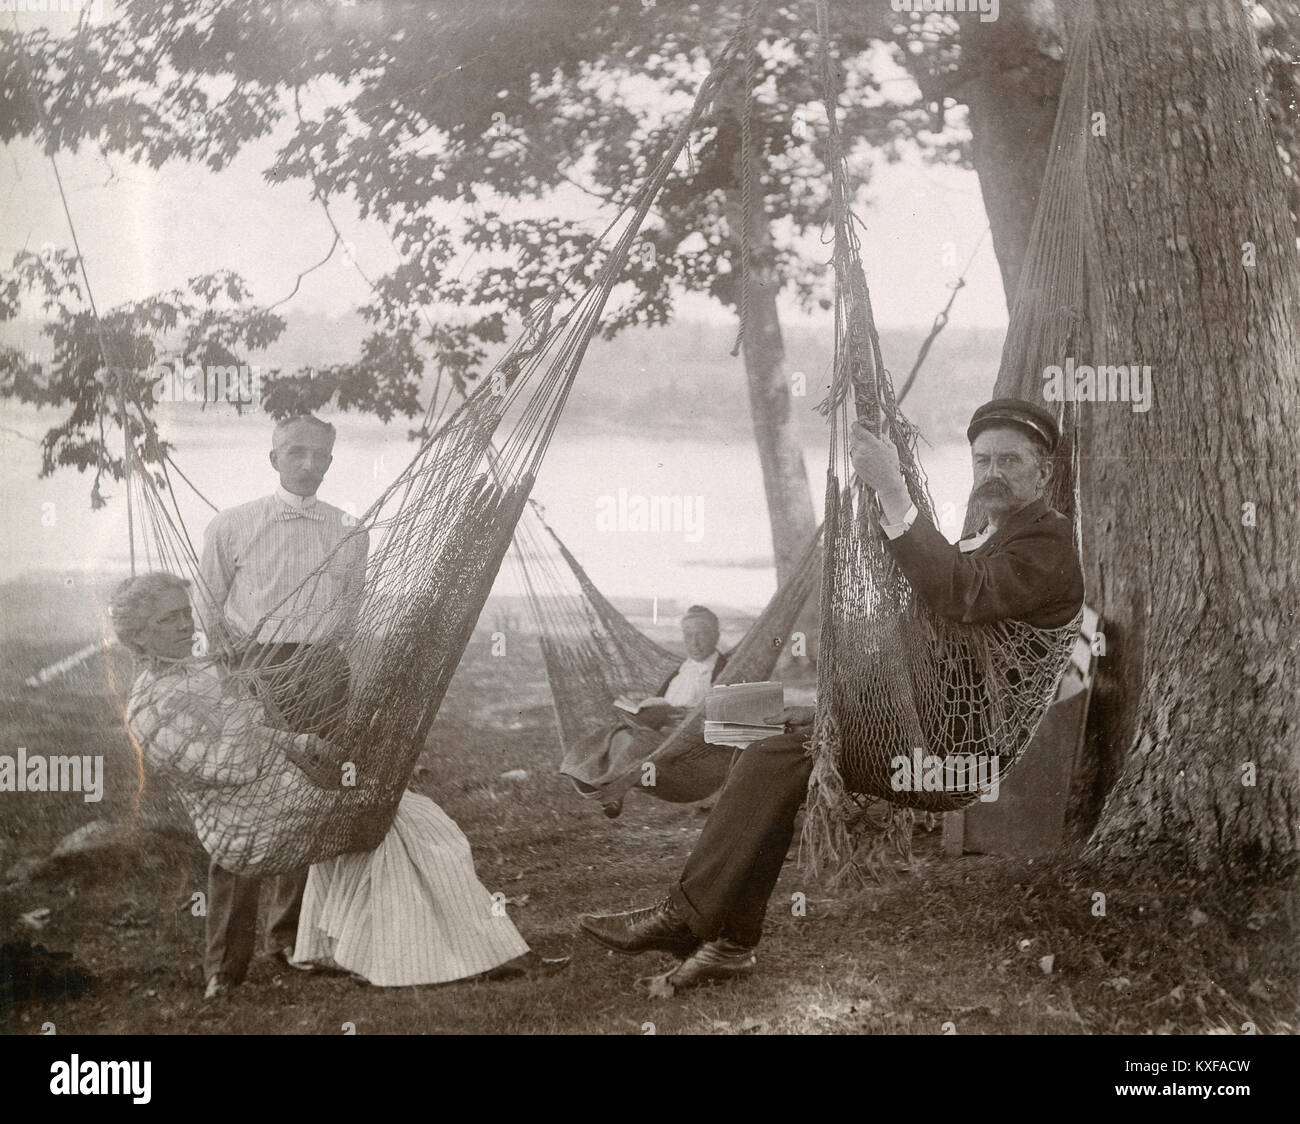 Antique circa 1905 photograph, family resting in a shady glen with bench and hammocks, with the Sasanoa River behind them. Location is in or near Riggsville (now Robinhood), Maine in Sagadahoc County, USA. Stock Photo